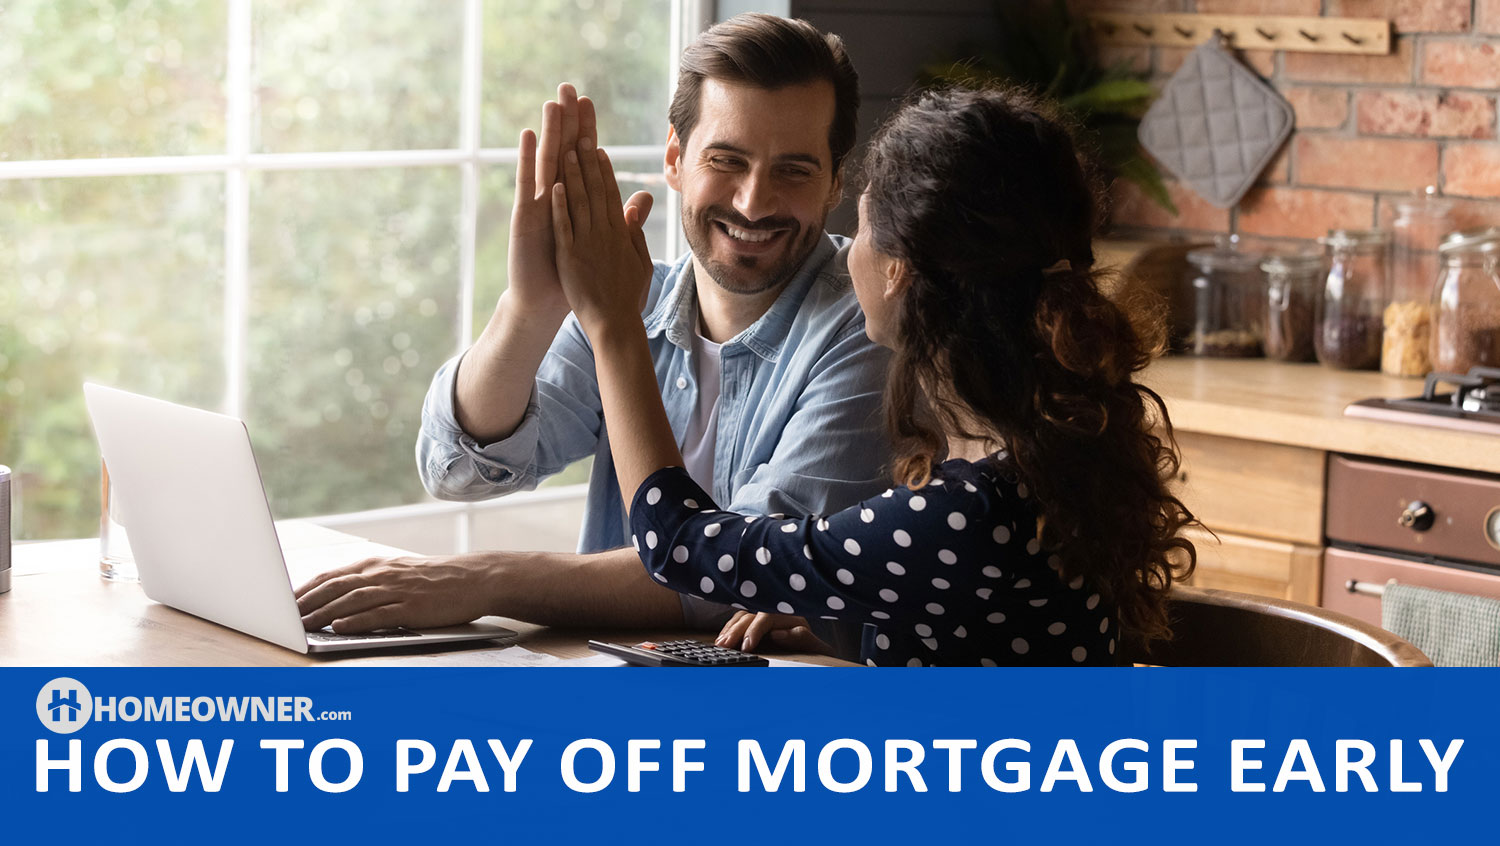 How To Pay Off Your Mortgage Early